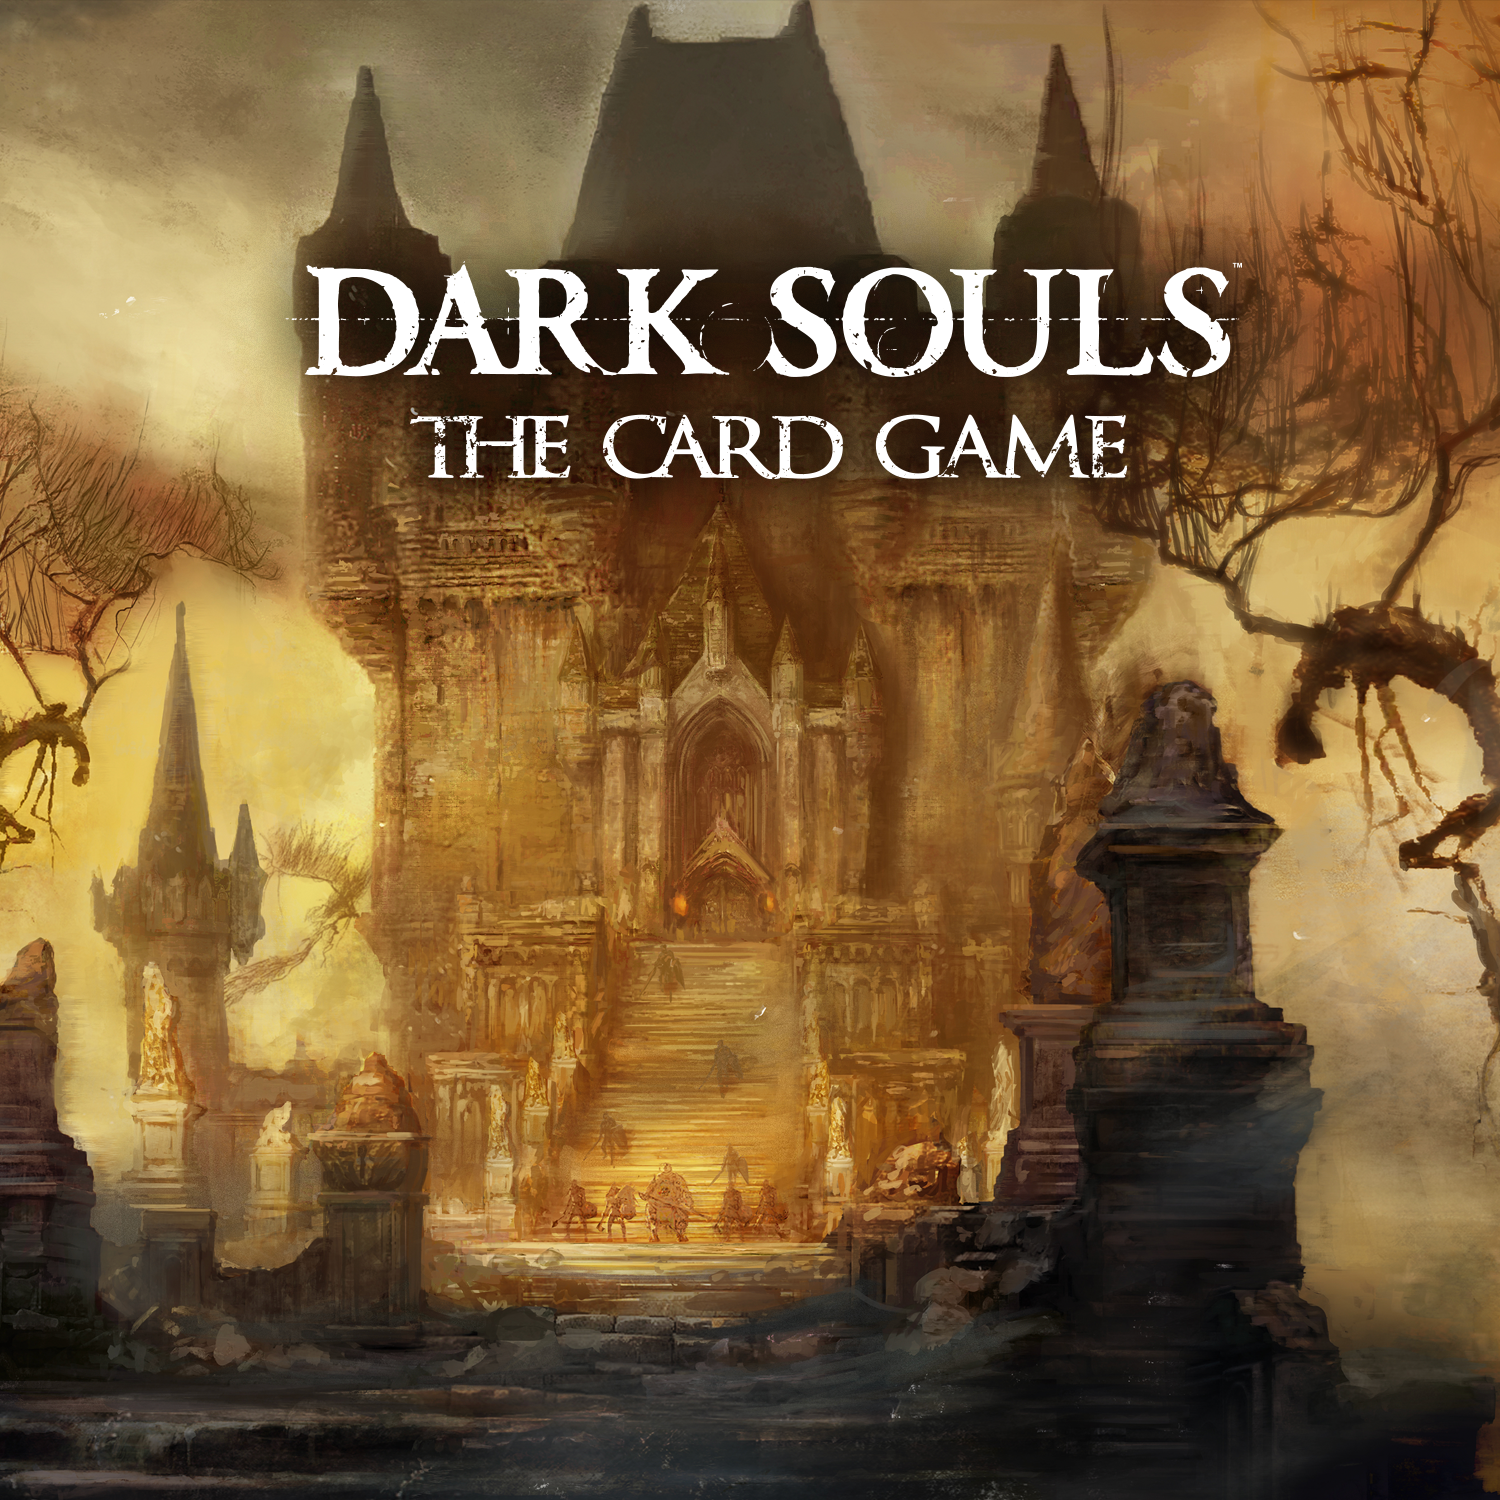 Dark Souls: The Card Game - Learn More >>